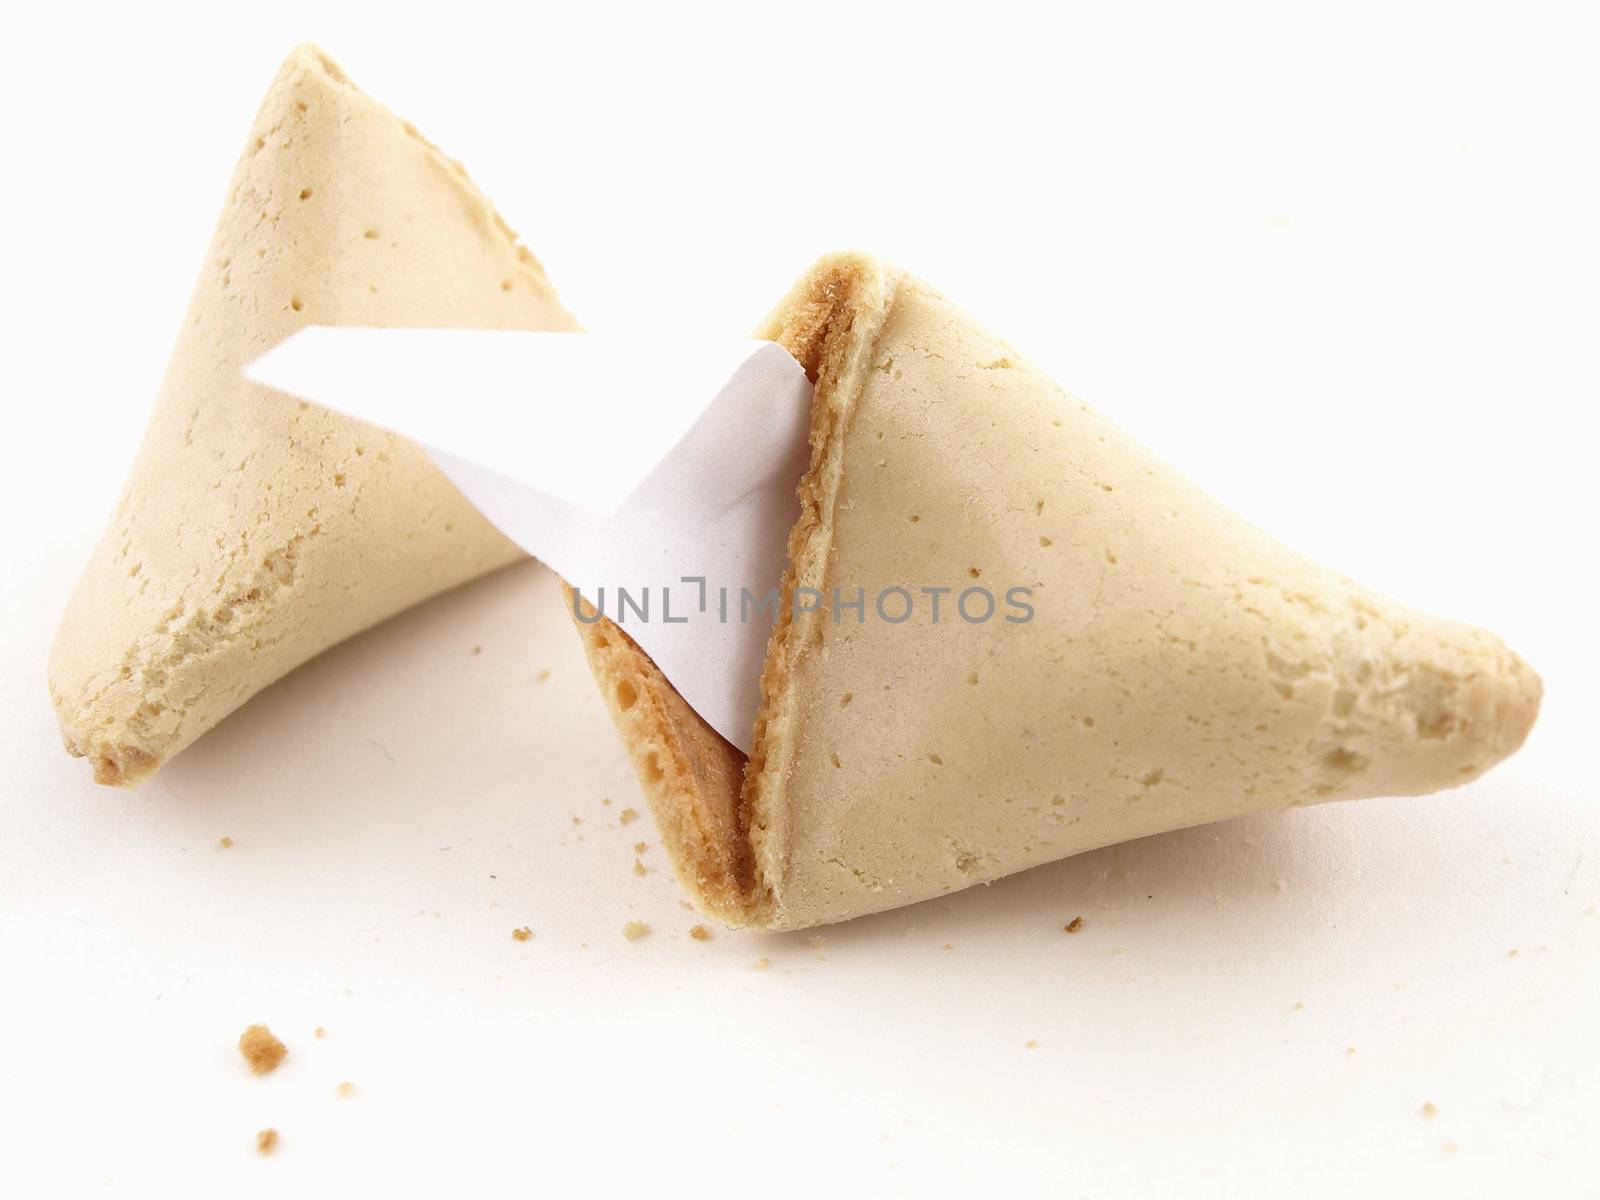 A broken fortune cookie over a white background. Cookie has blank fortune sticking out of one side.